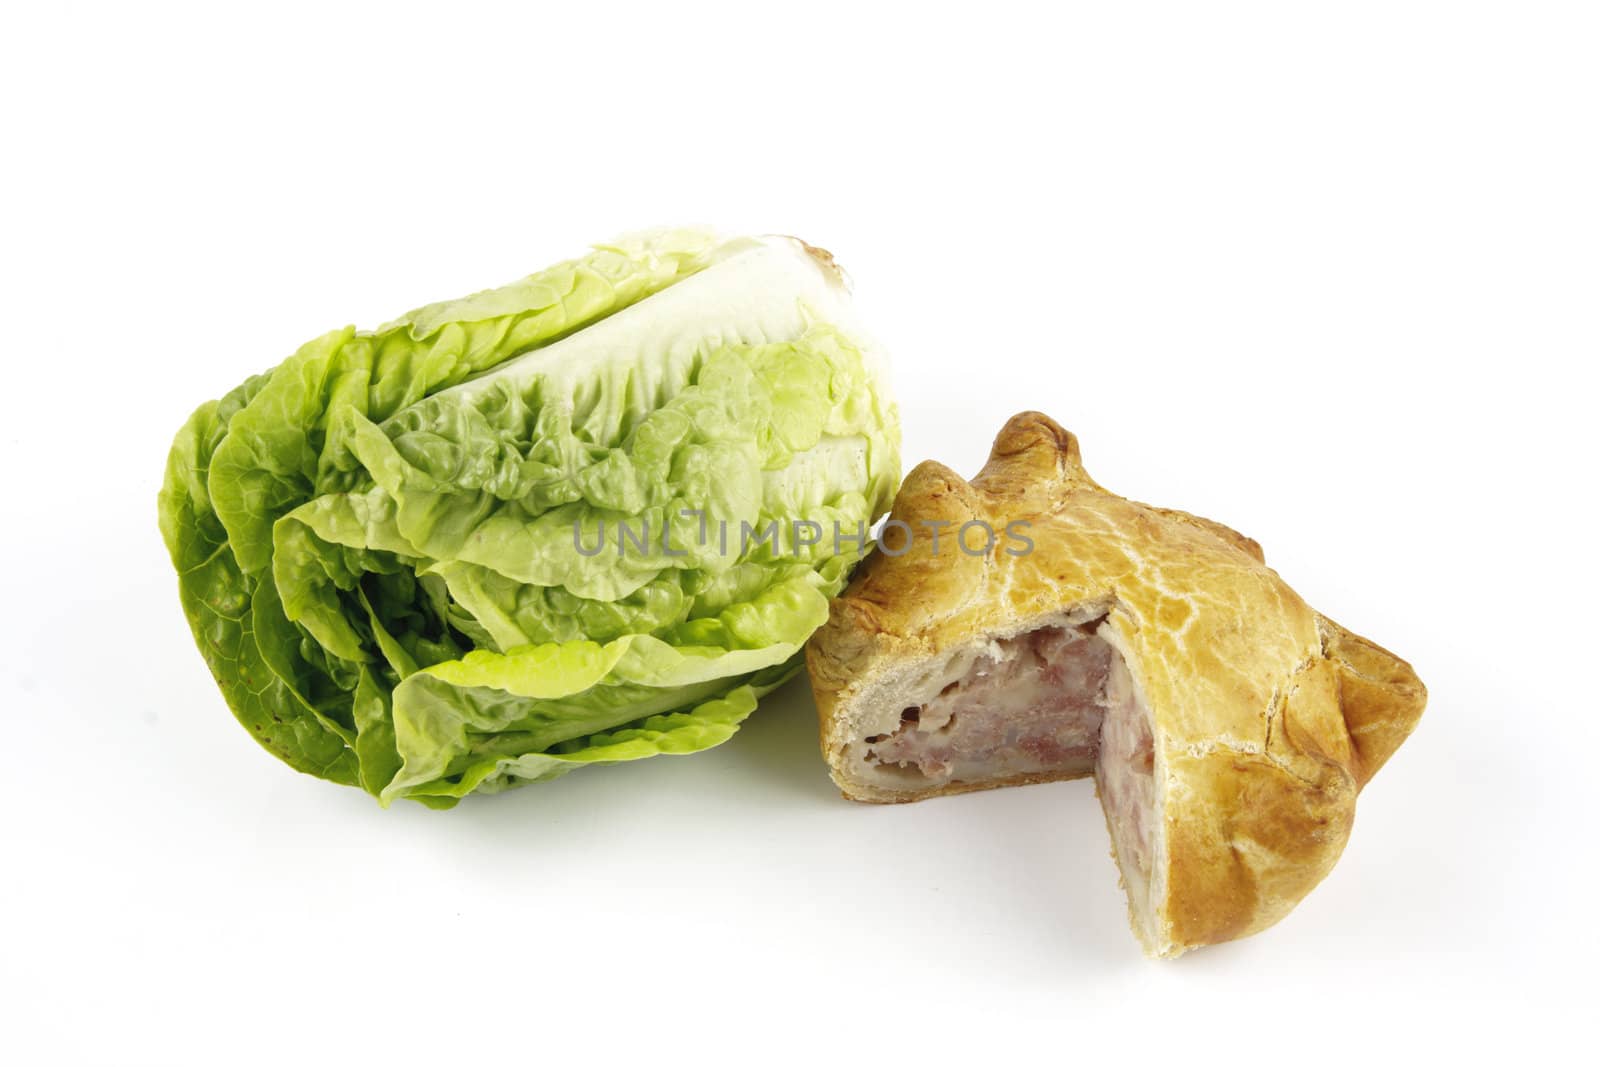 Contradiction between healthy food and junk food using a green salad lettace and pork pie on a reflective white background 